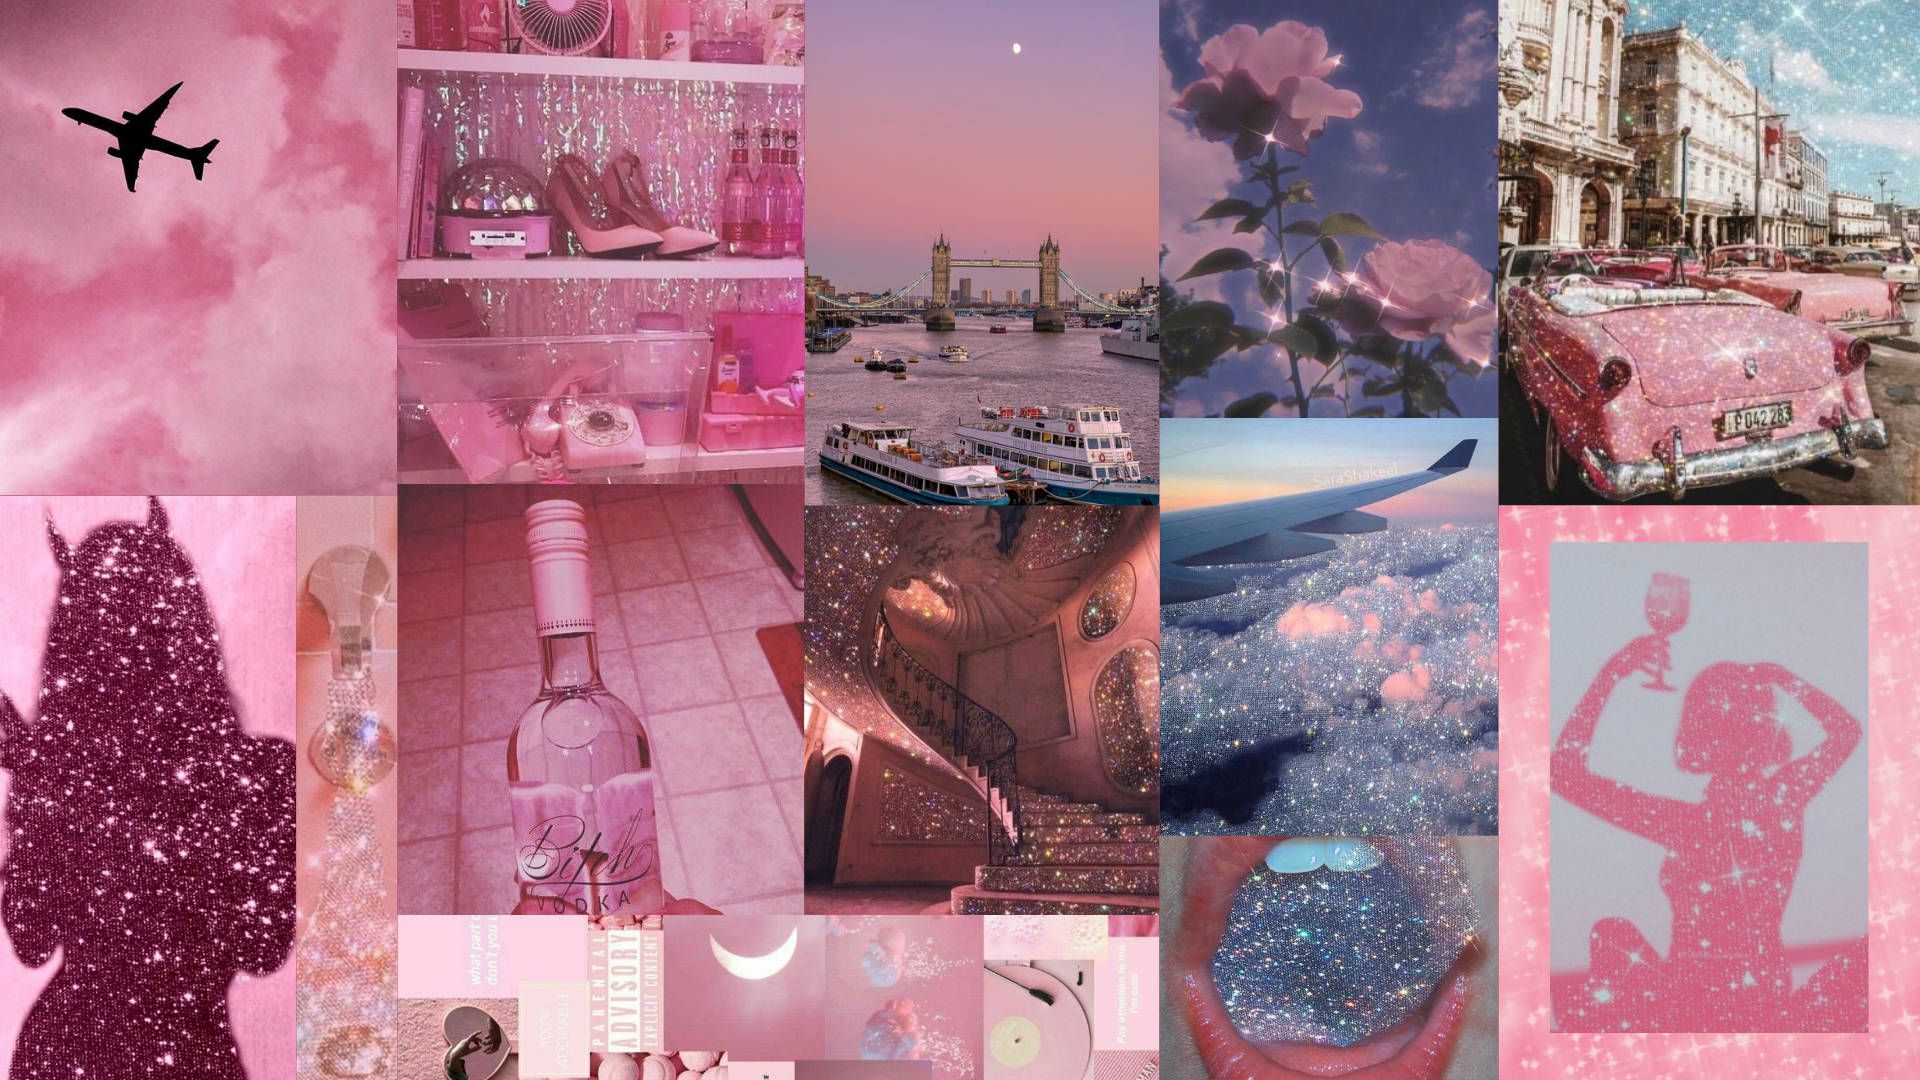 Free Girly Pink Aesthetic Wallpaper Downloads, Girly Pink Aesthetic Wallpaper for FREE